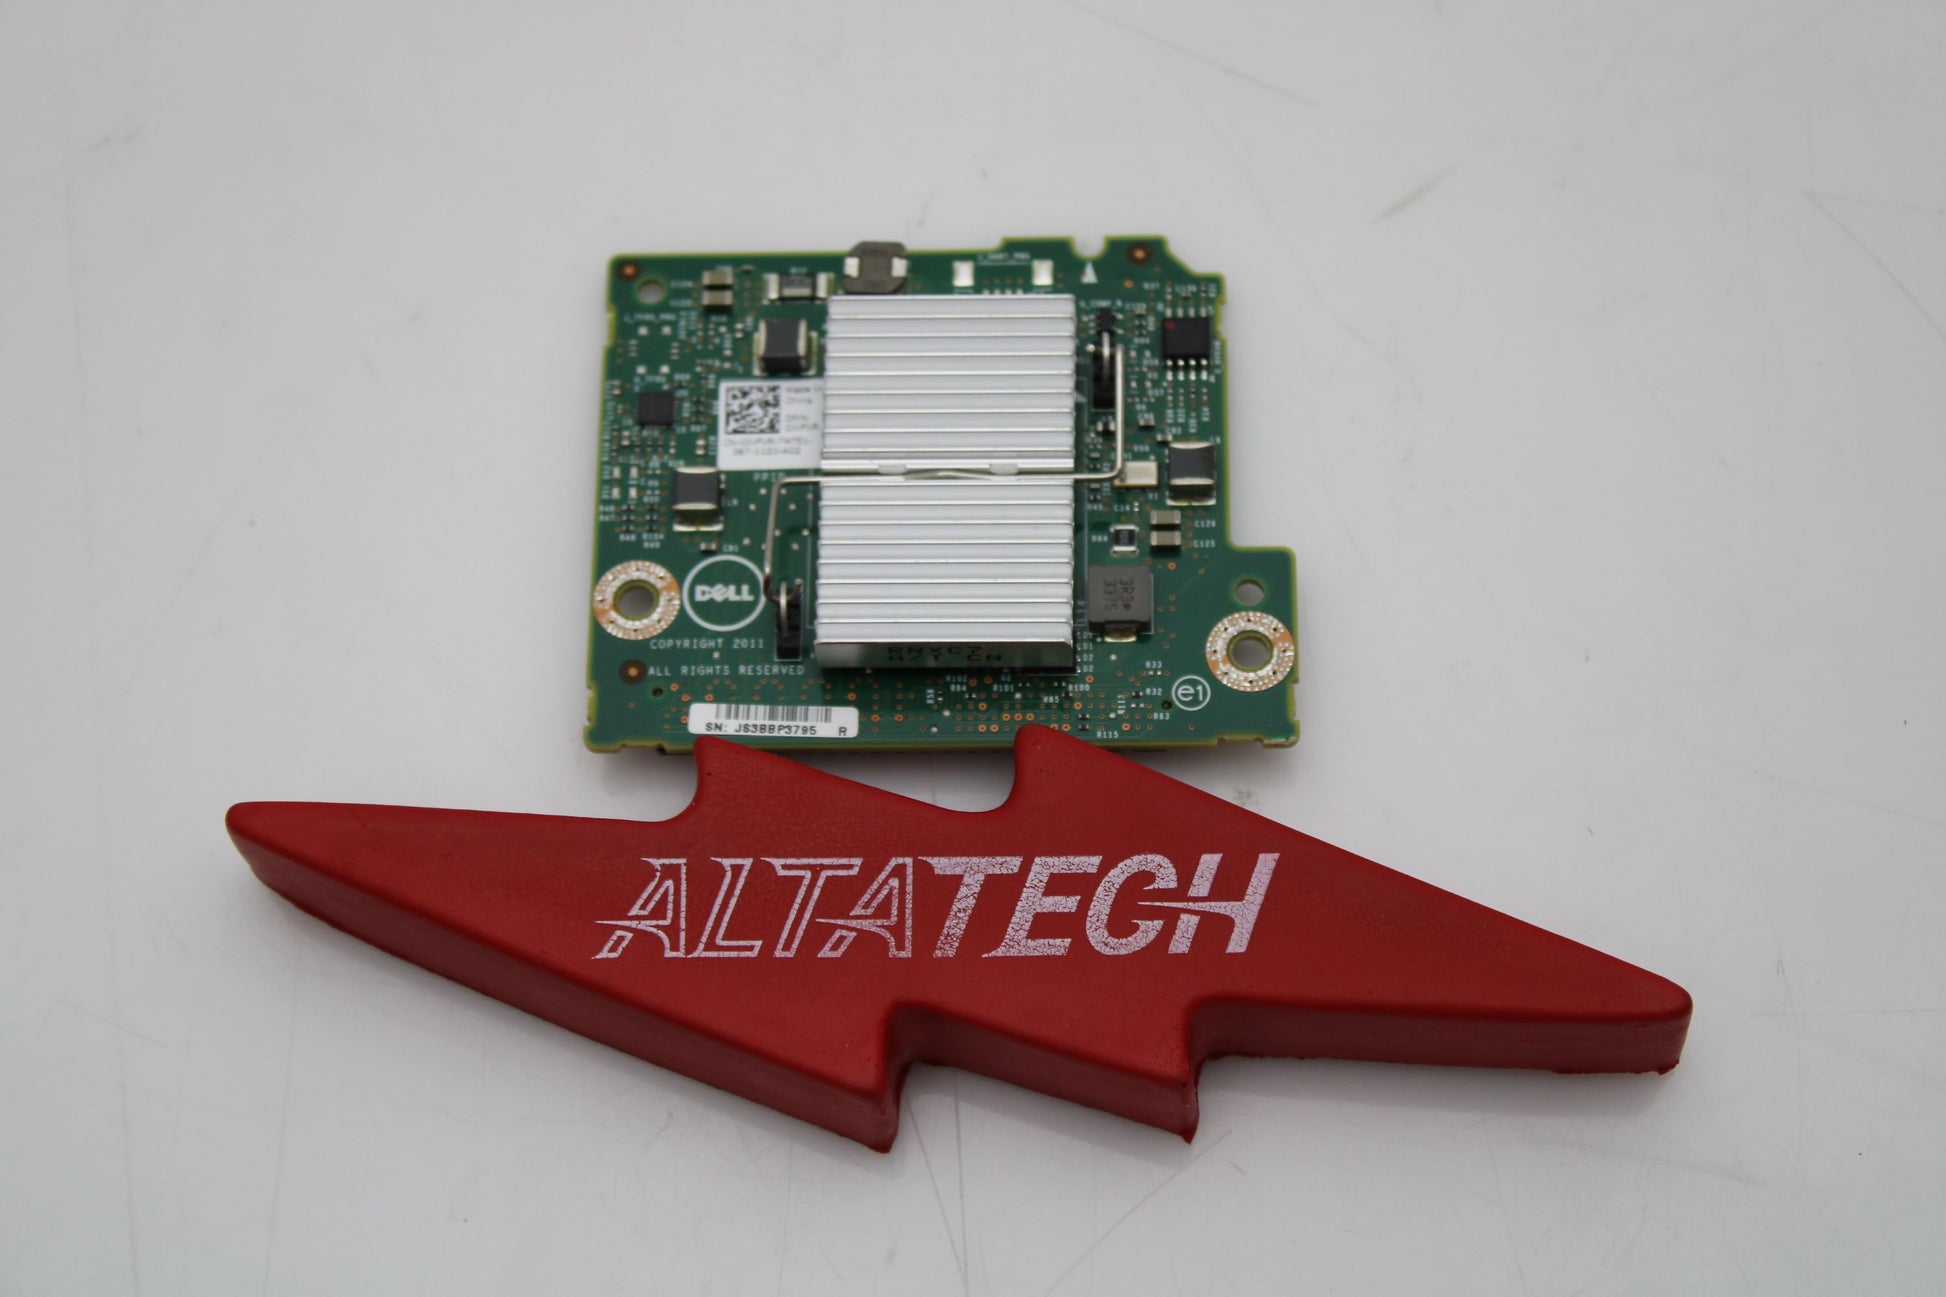 Dell 430-4398 57810-K 10GB DP Daughter Card, Used